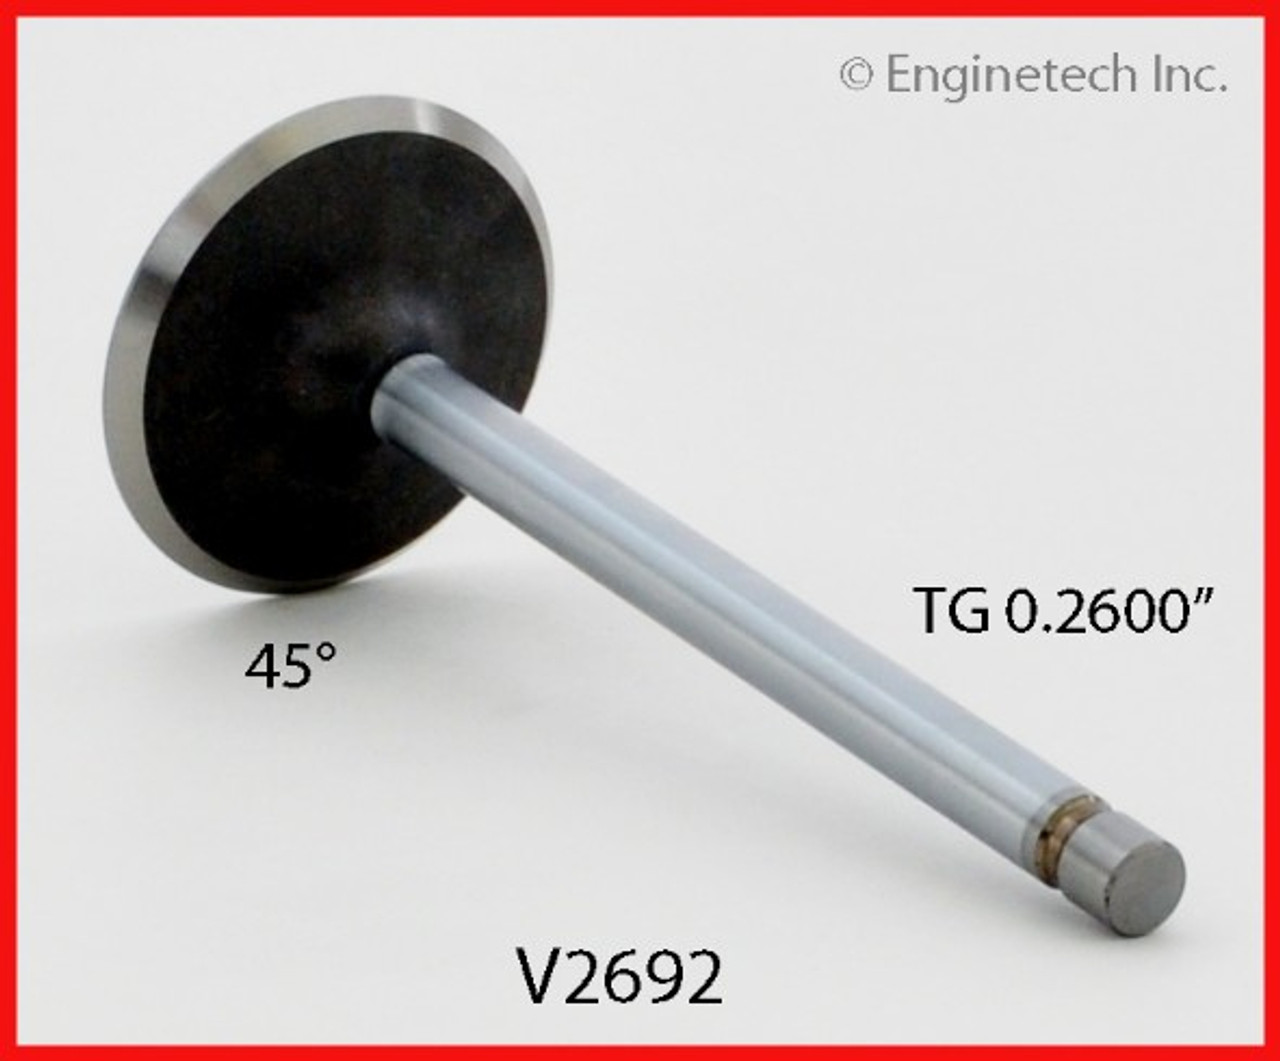 Intake Valve - 1996 Buick Commercial Chassis 5.7L (V2692.C27)